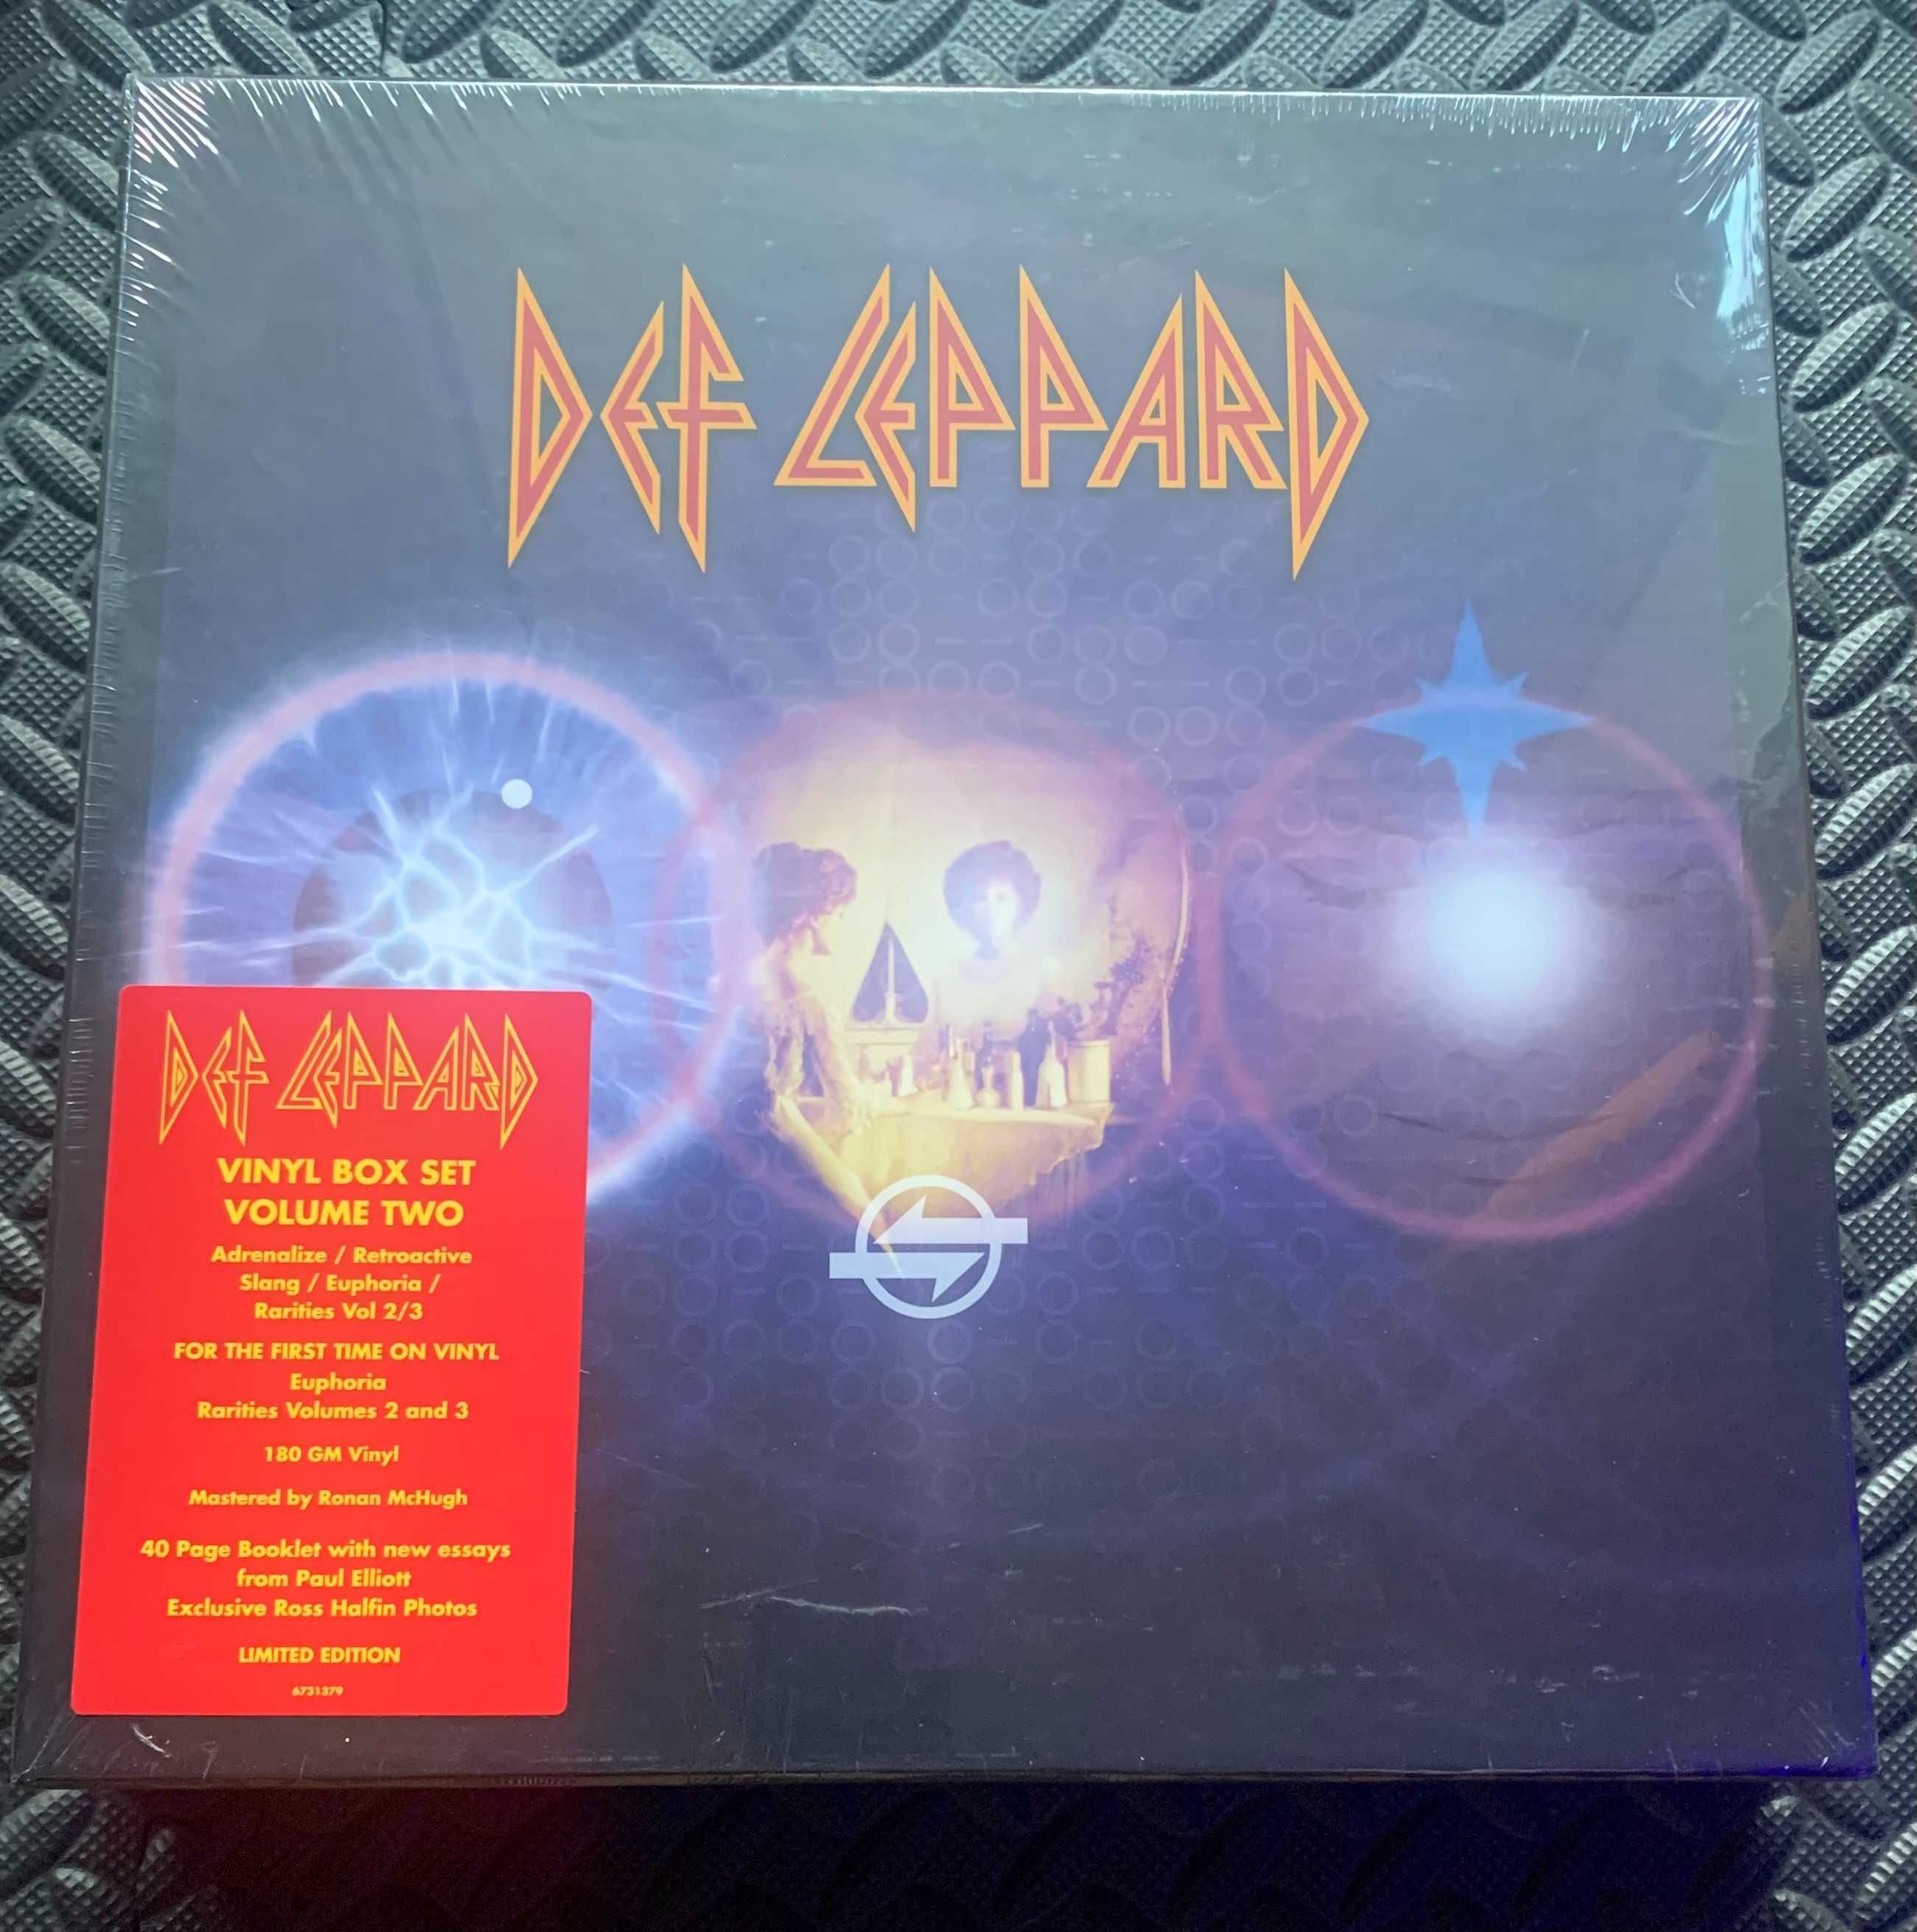 Def Leppard ‎– Vinyl Collection Volume Two Box set